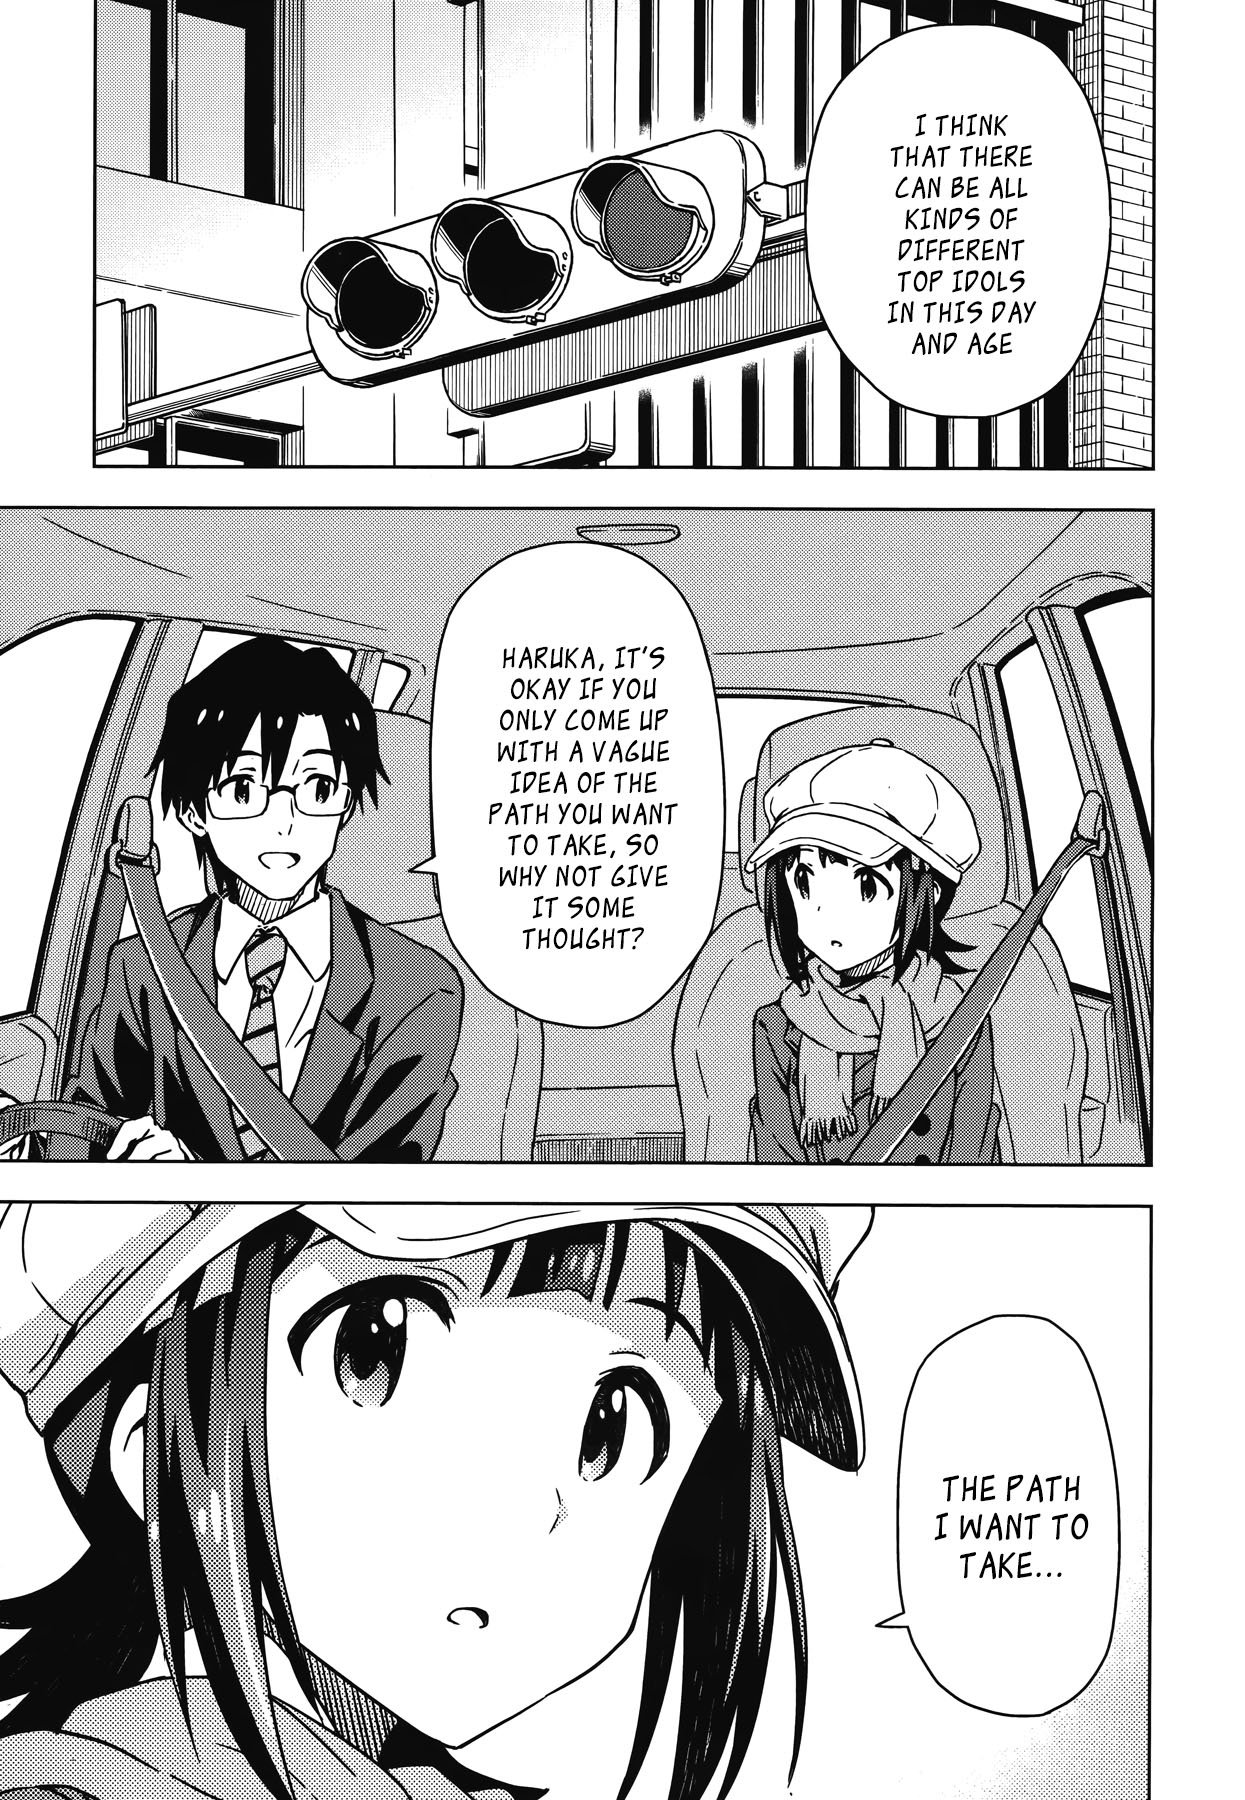 THE iDOLM@STER (Mana) Ch. 25 765pro